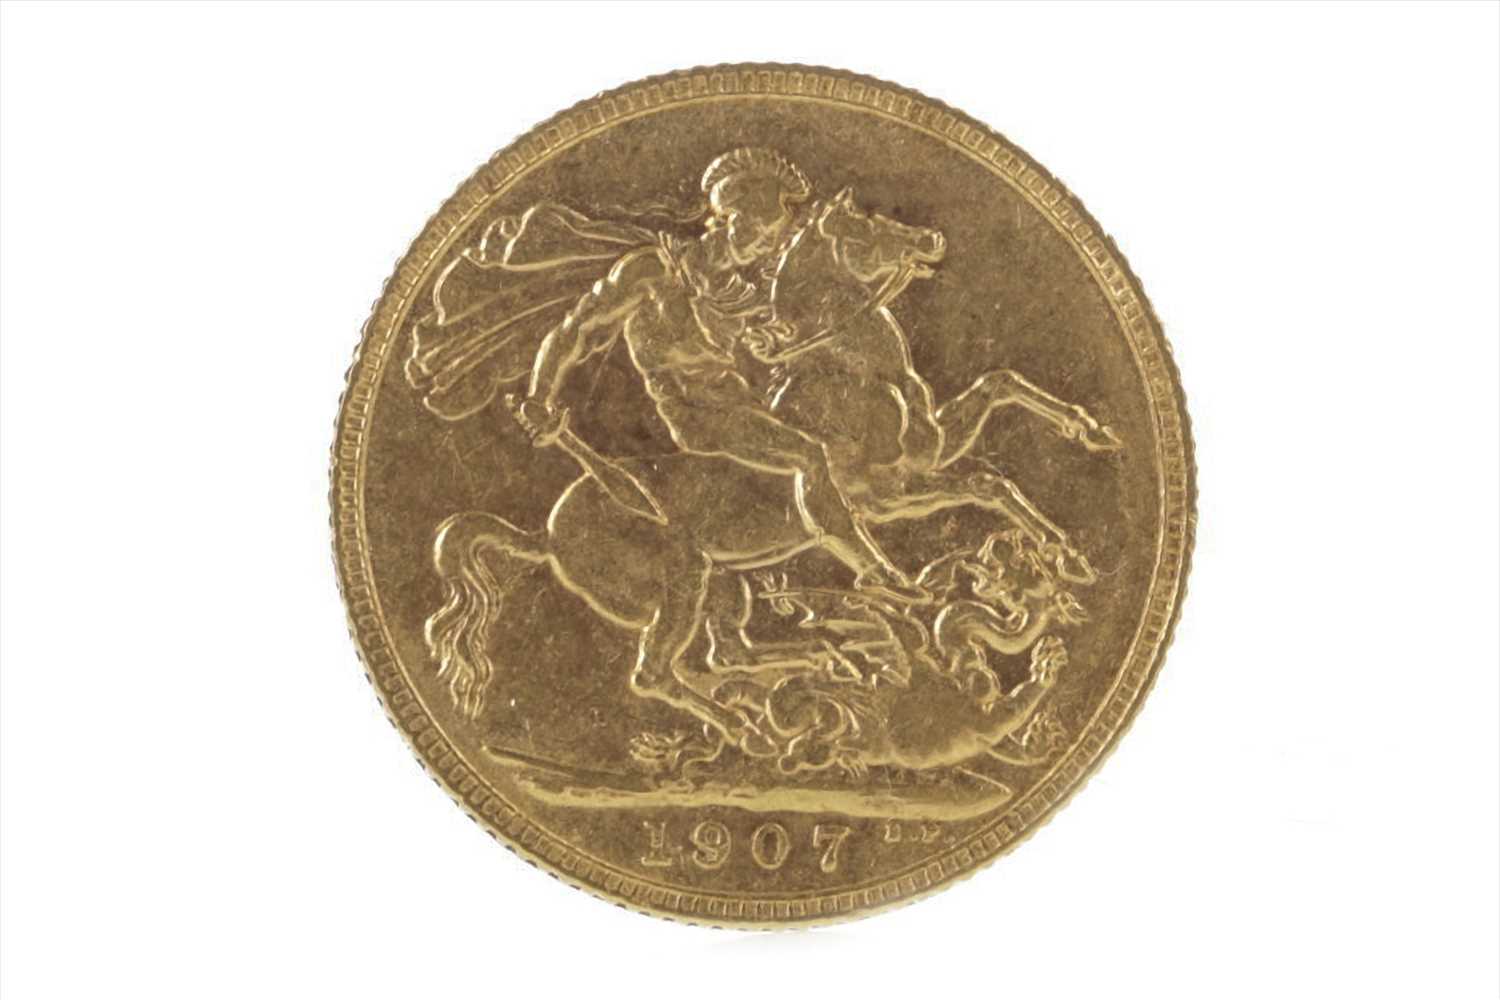 Lot 521 - A GOLD SOVEREIGN, 1907